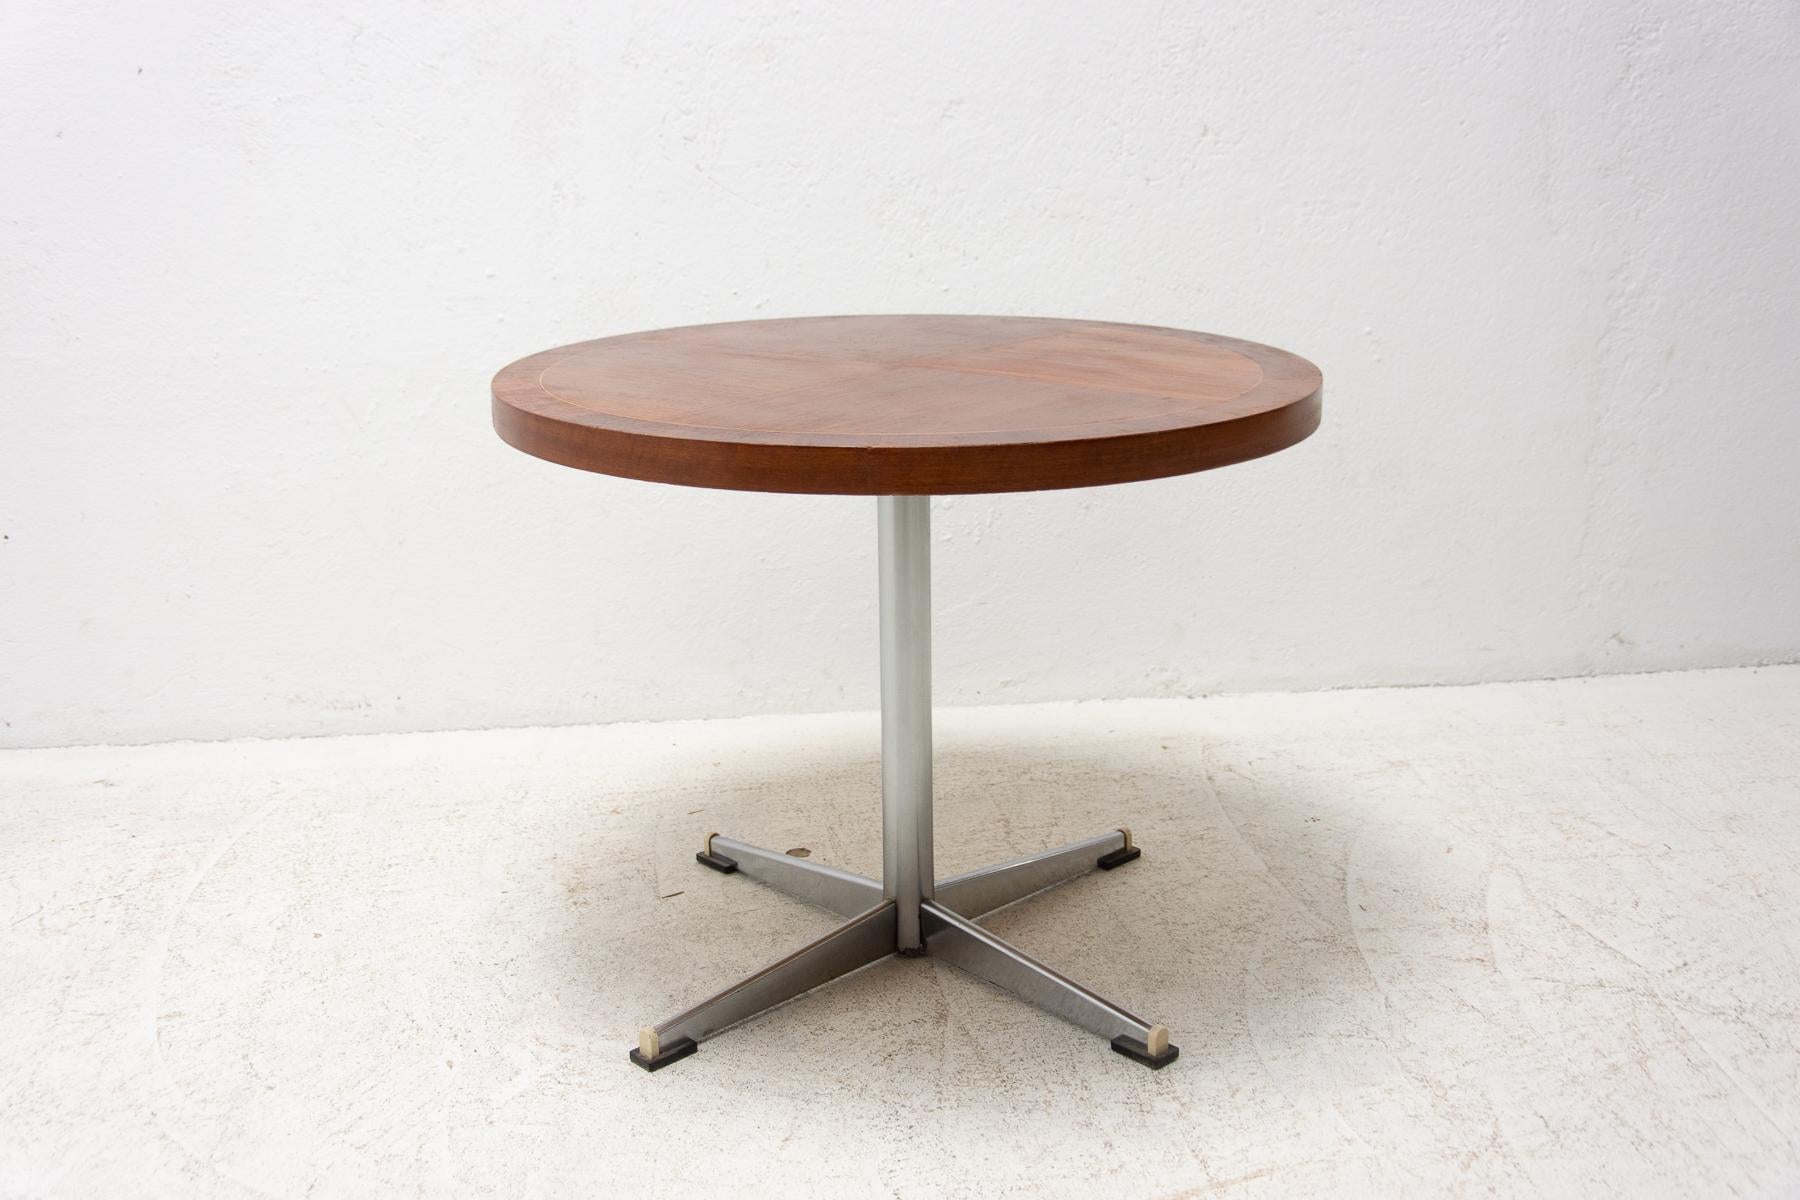 Mid century coffee table, made in the former Czechoslovakia in the 1970´s.
It´s made of wood with a walnut veneer board and has iron legs.
In good Vintage condition, showing signs of age and using.

Measures: Height: 54 cm

Lenght: 69